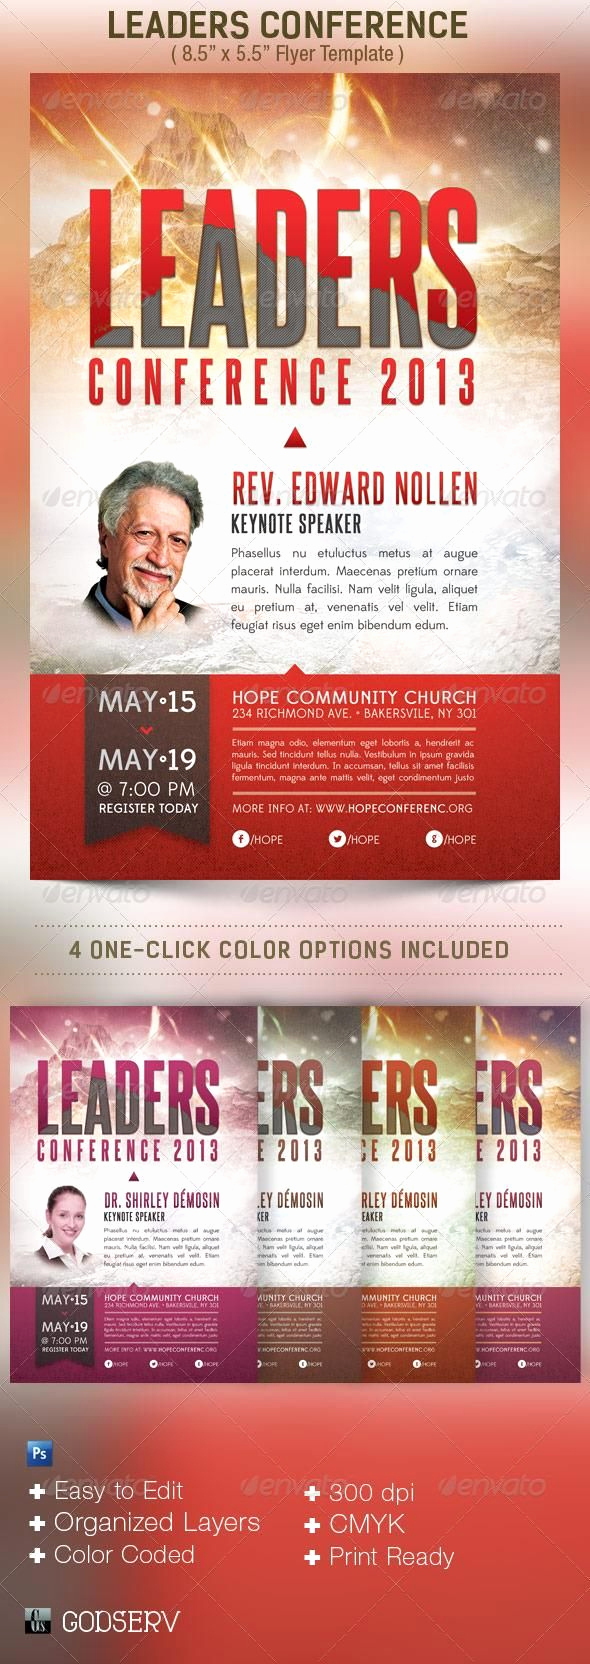 Free Church Flyer Templates New Leadership Conference Church Flyer Template